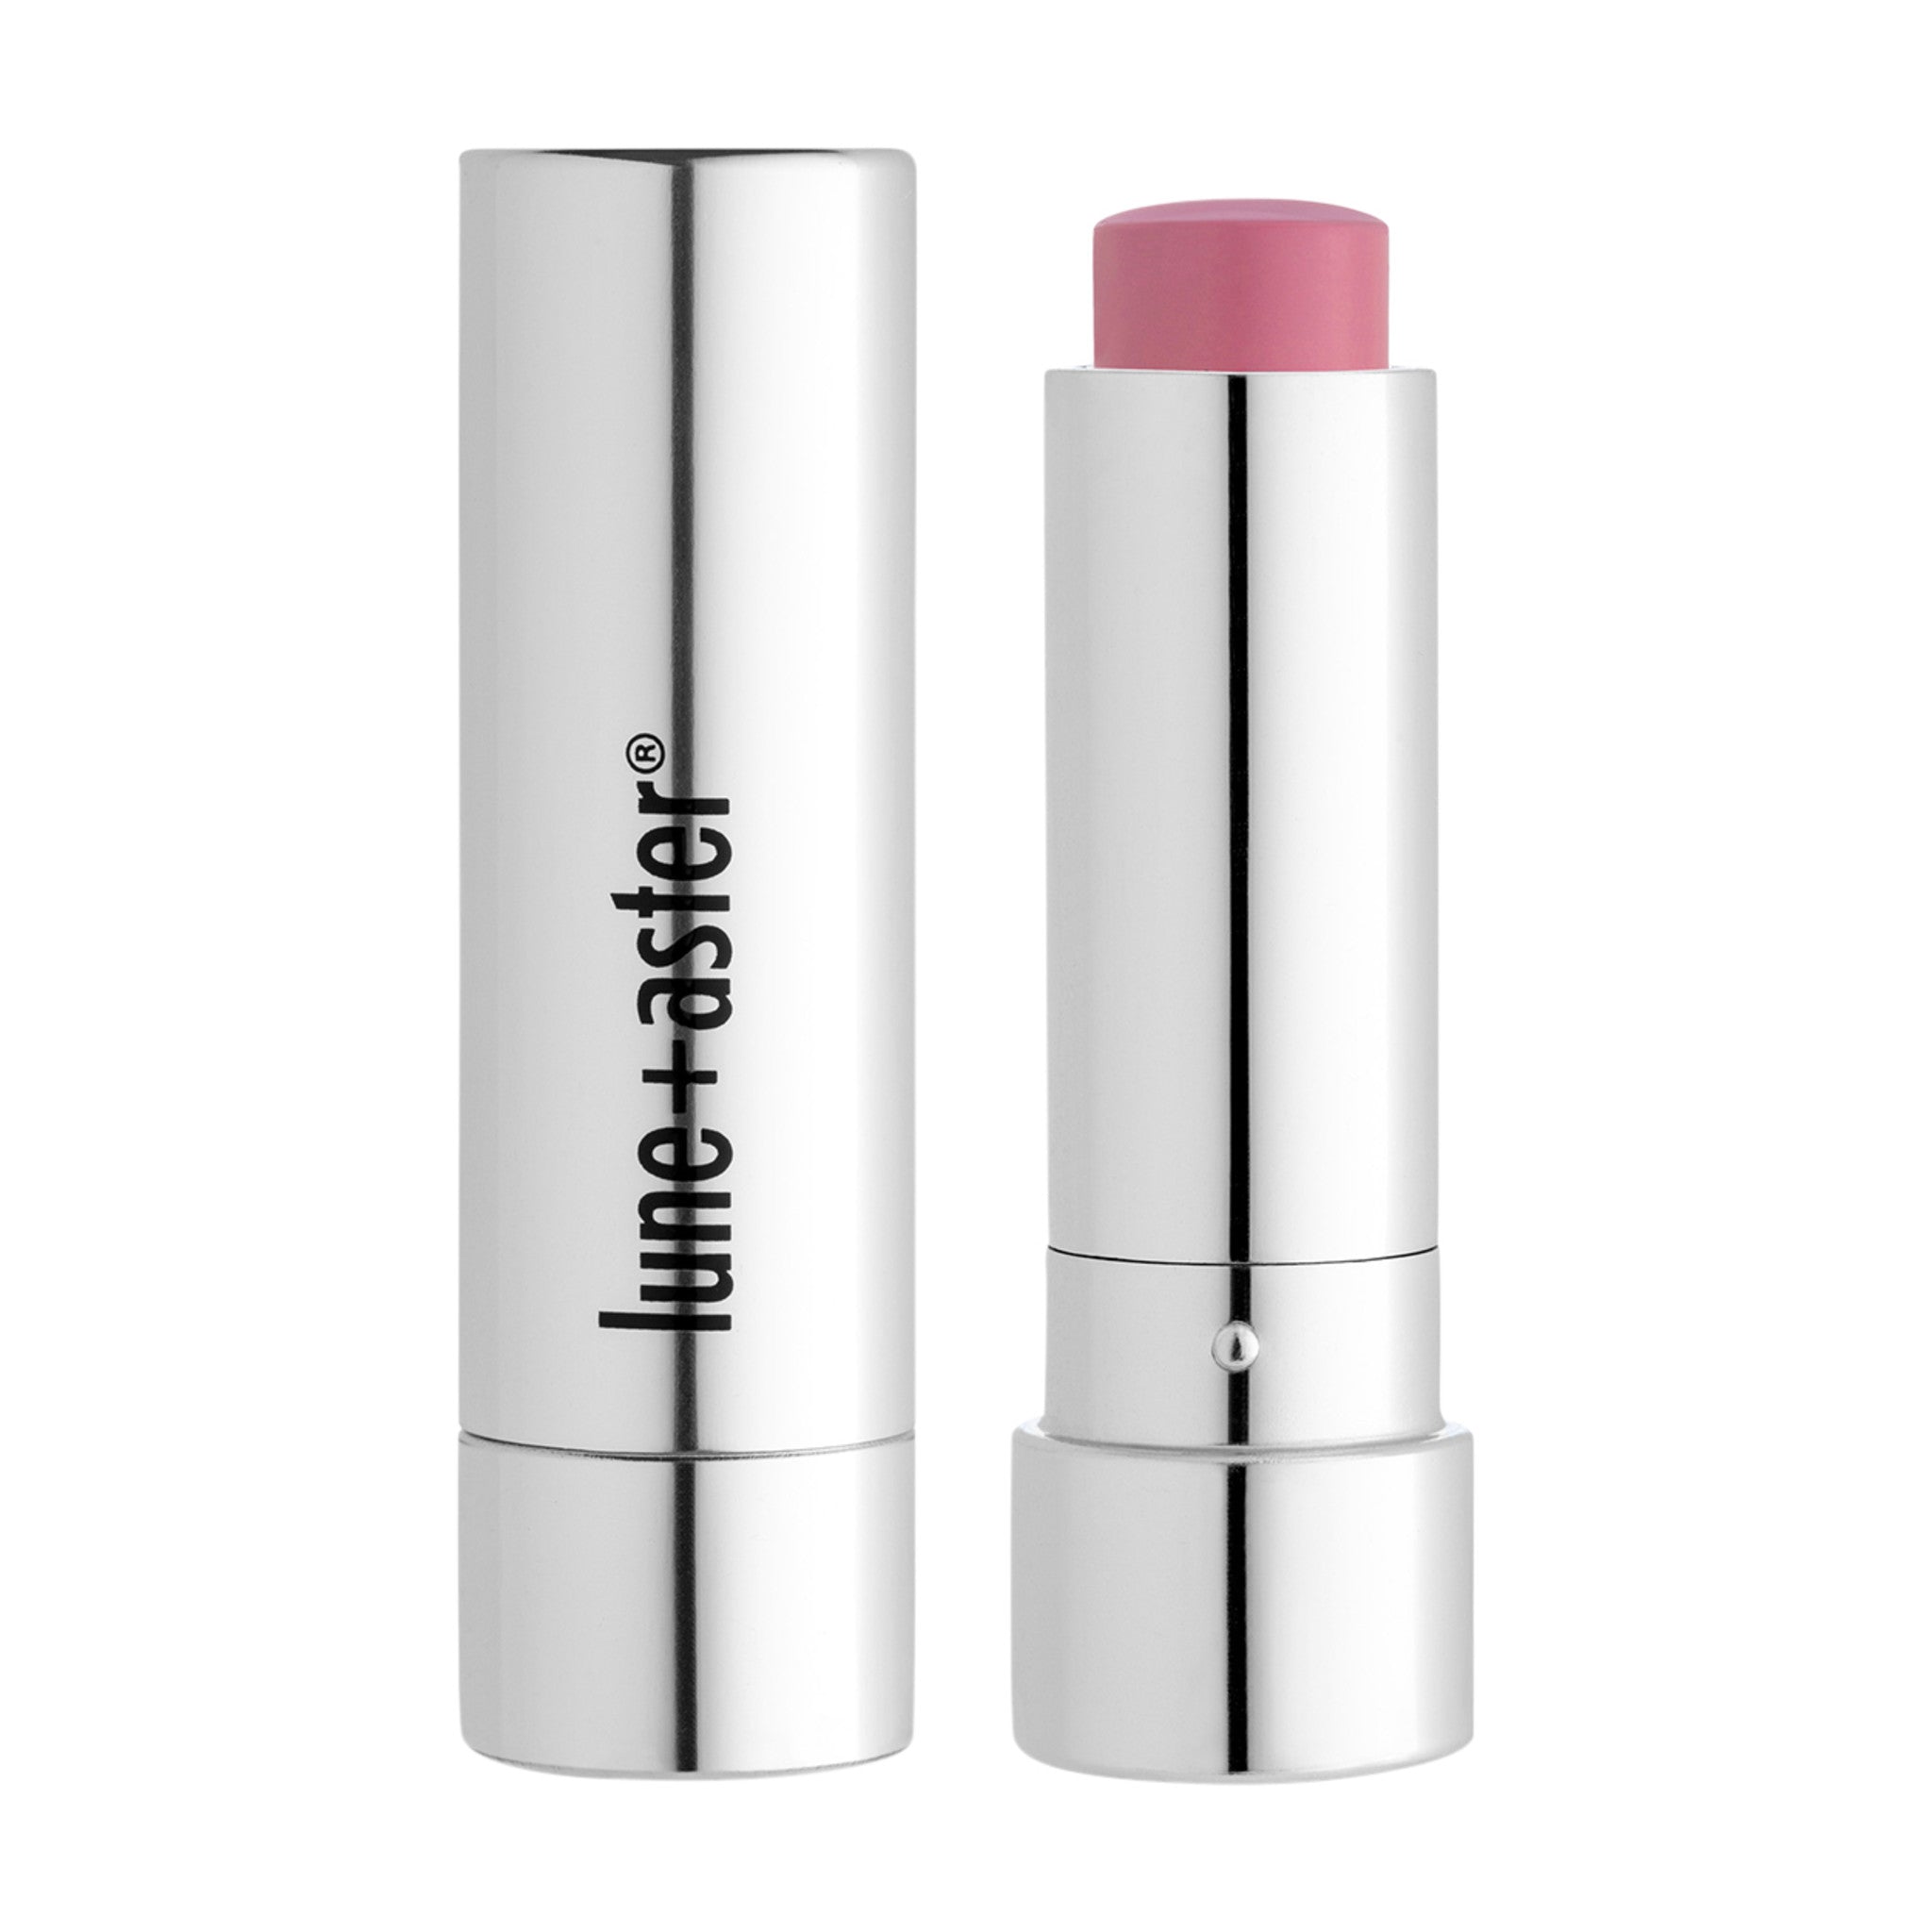 Lune+Aster Tinted Lip Balm Color/Shade variant: Yes We Can main image. This product is in the color pink